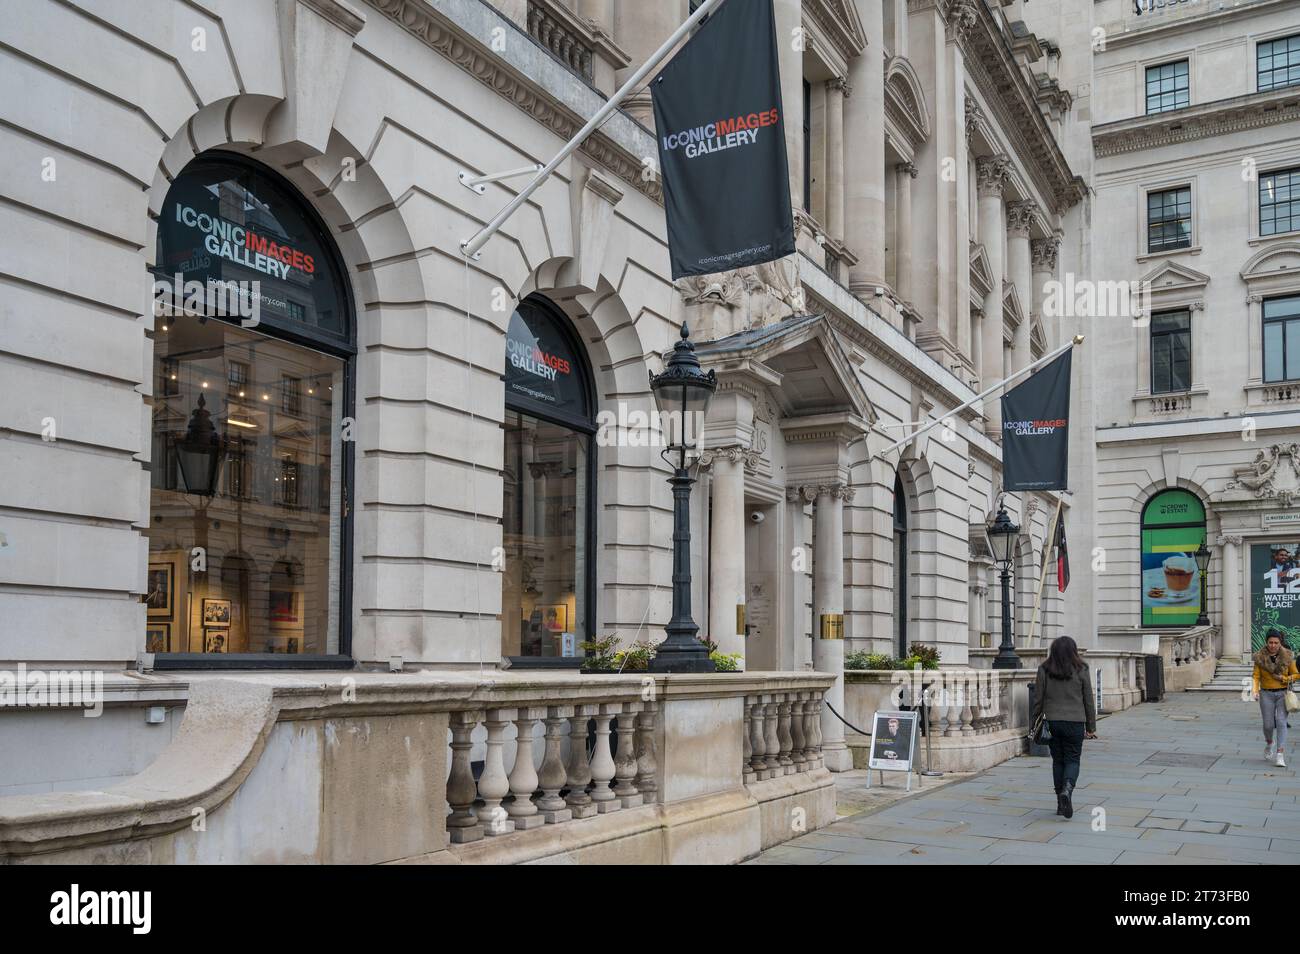 The Iconic Images Gallery - Piccadilly. A gallery specialising in fine art limited edition photography prints. Waterloo Place, St. James's, London, UK Stock Photo